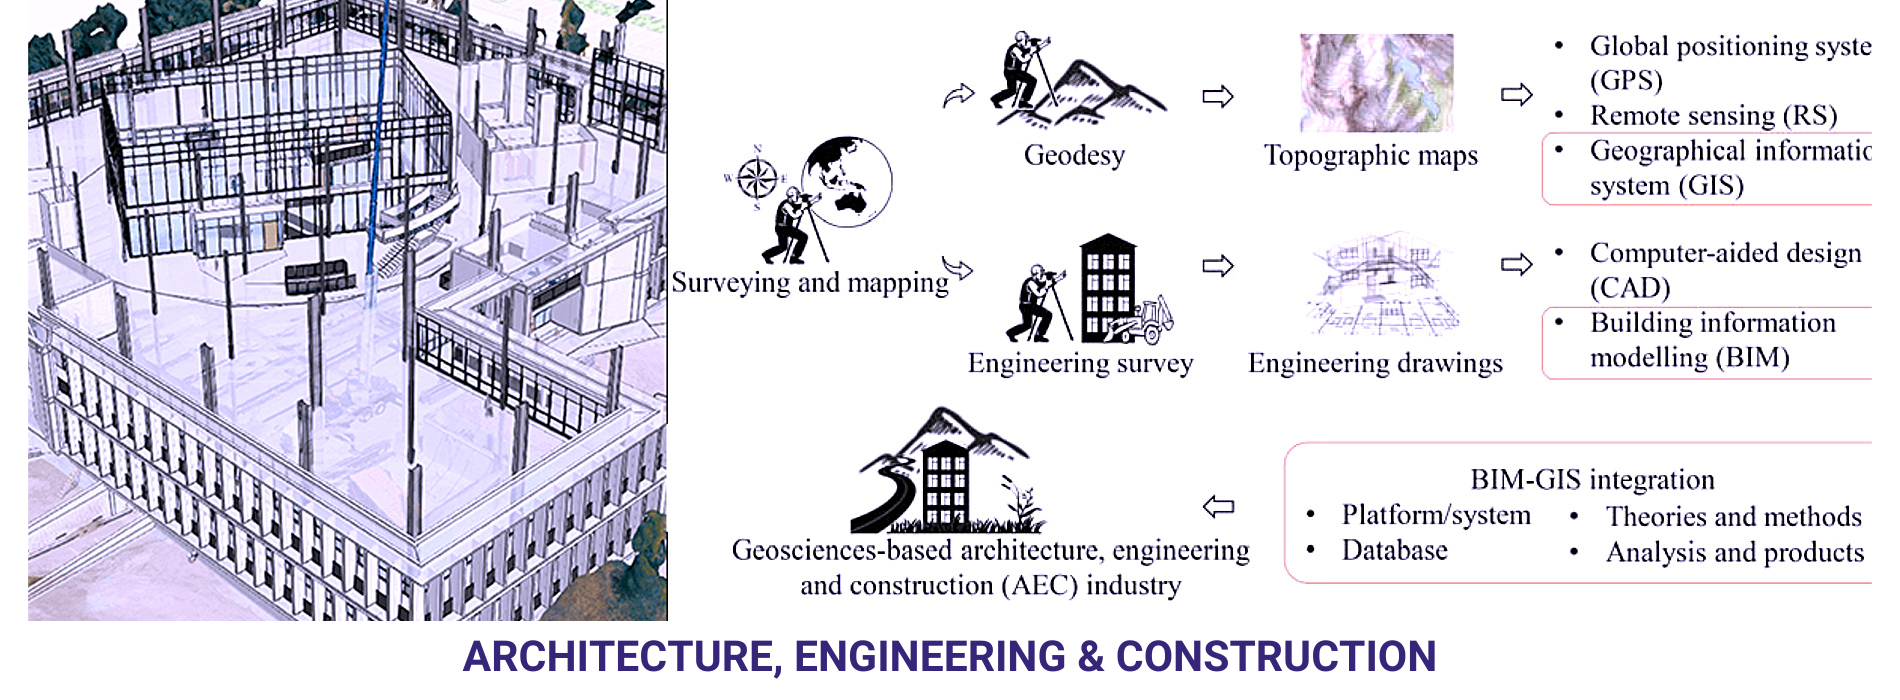 01 ARCHITECTURE, ENGINEERING & CONSTRUCTION_1